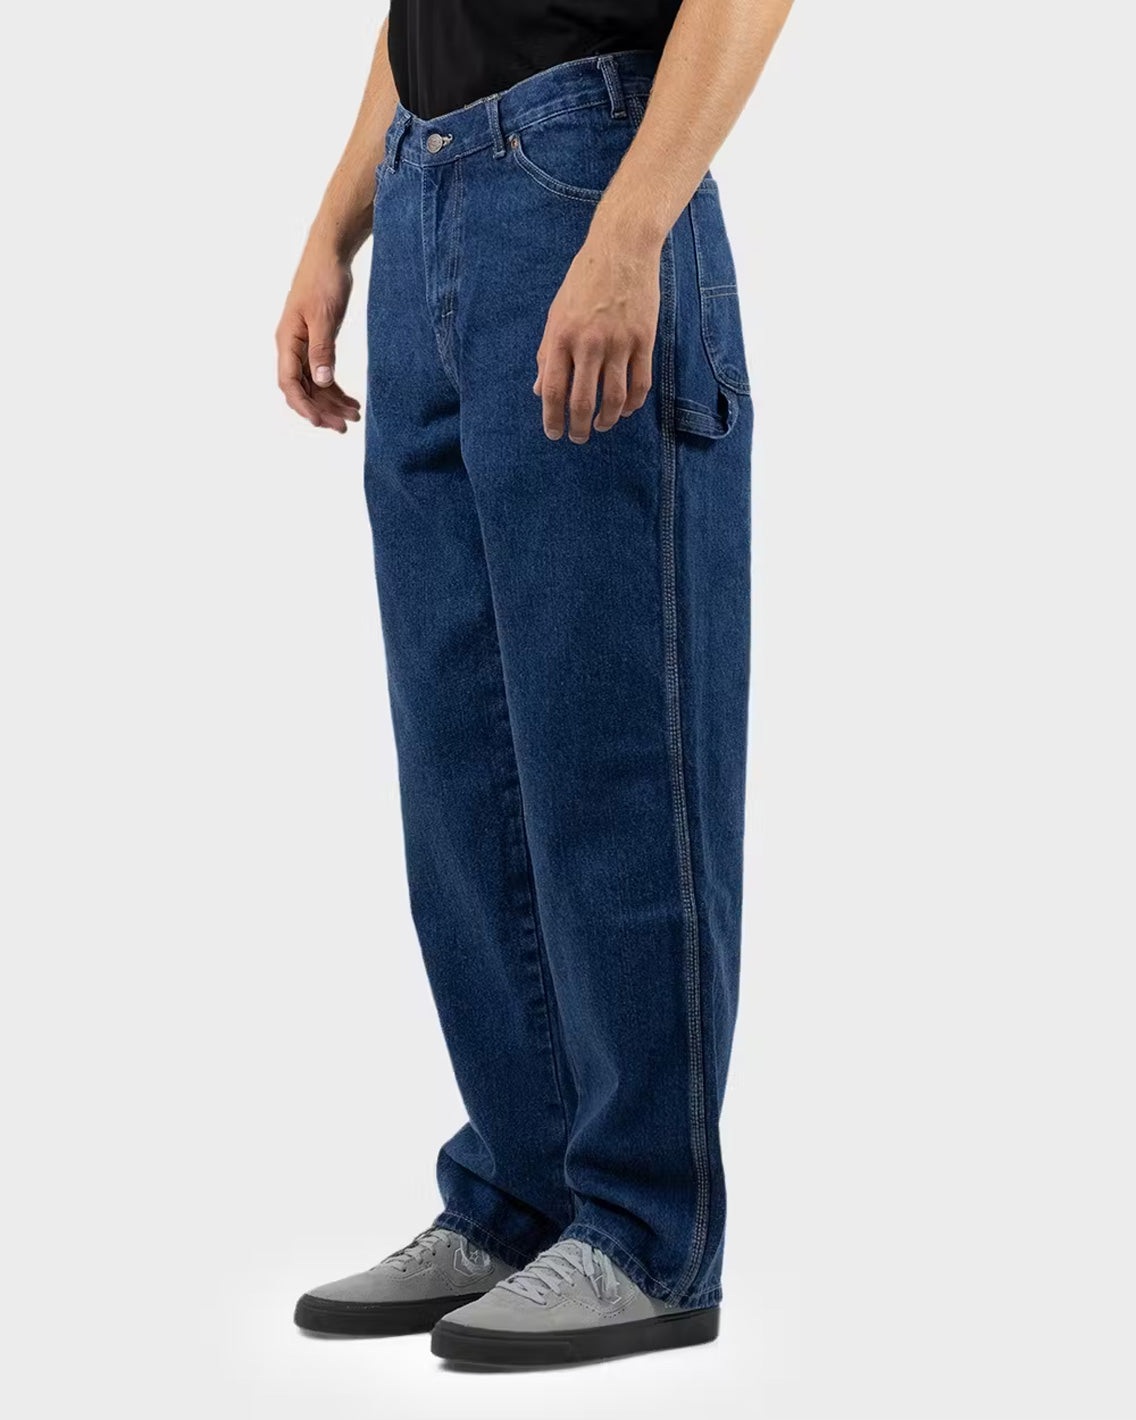 Dickies - Relaxed Fit Carpenter Jean - Stone Washed Indigo